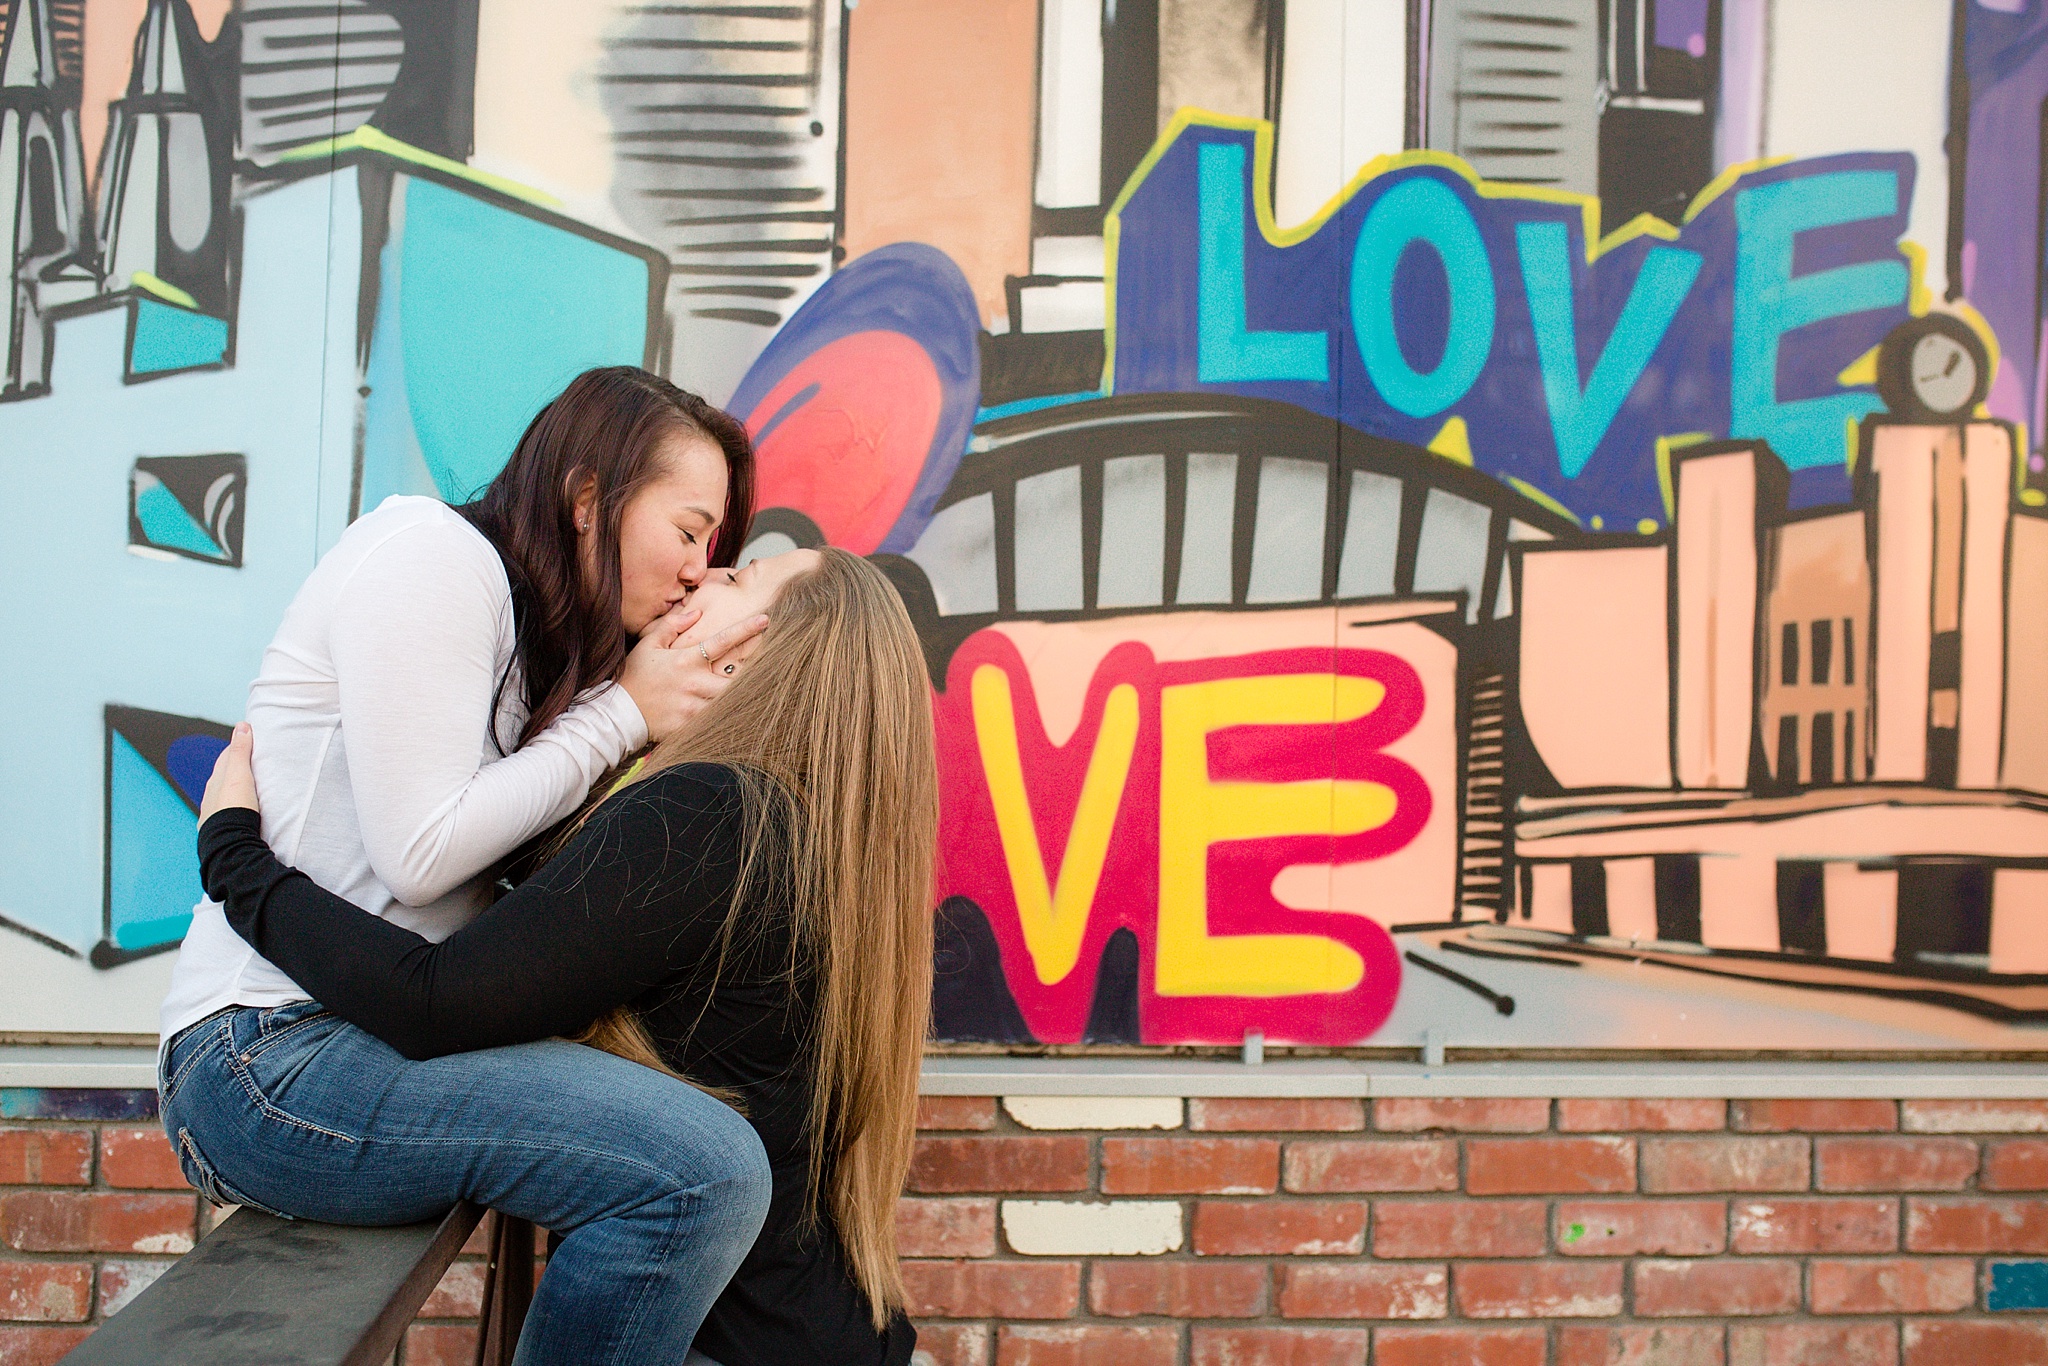 Same-Sex Couple kissing in front of a mural. Jessica & Caity’s Same-Sex Engagement Session at 10 Barrel Brewery & RiNo District by Colorado Engagement Photographer, Jennifer Garza. 10 Barrel Brewery Engagement, Brewery Engagement Photos, RiNo District Engagement Photos, RiNo District, RiNo Engagement Photography, Denver Engagement Photography, Denver Engagement, Colorado Engagement Photography, Urban Engagement Photos, Same-Sex Engagement Photography, Same-Sex Engagement Photos, Same Sex Marriage, Love is Love, LGBTQ